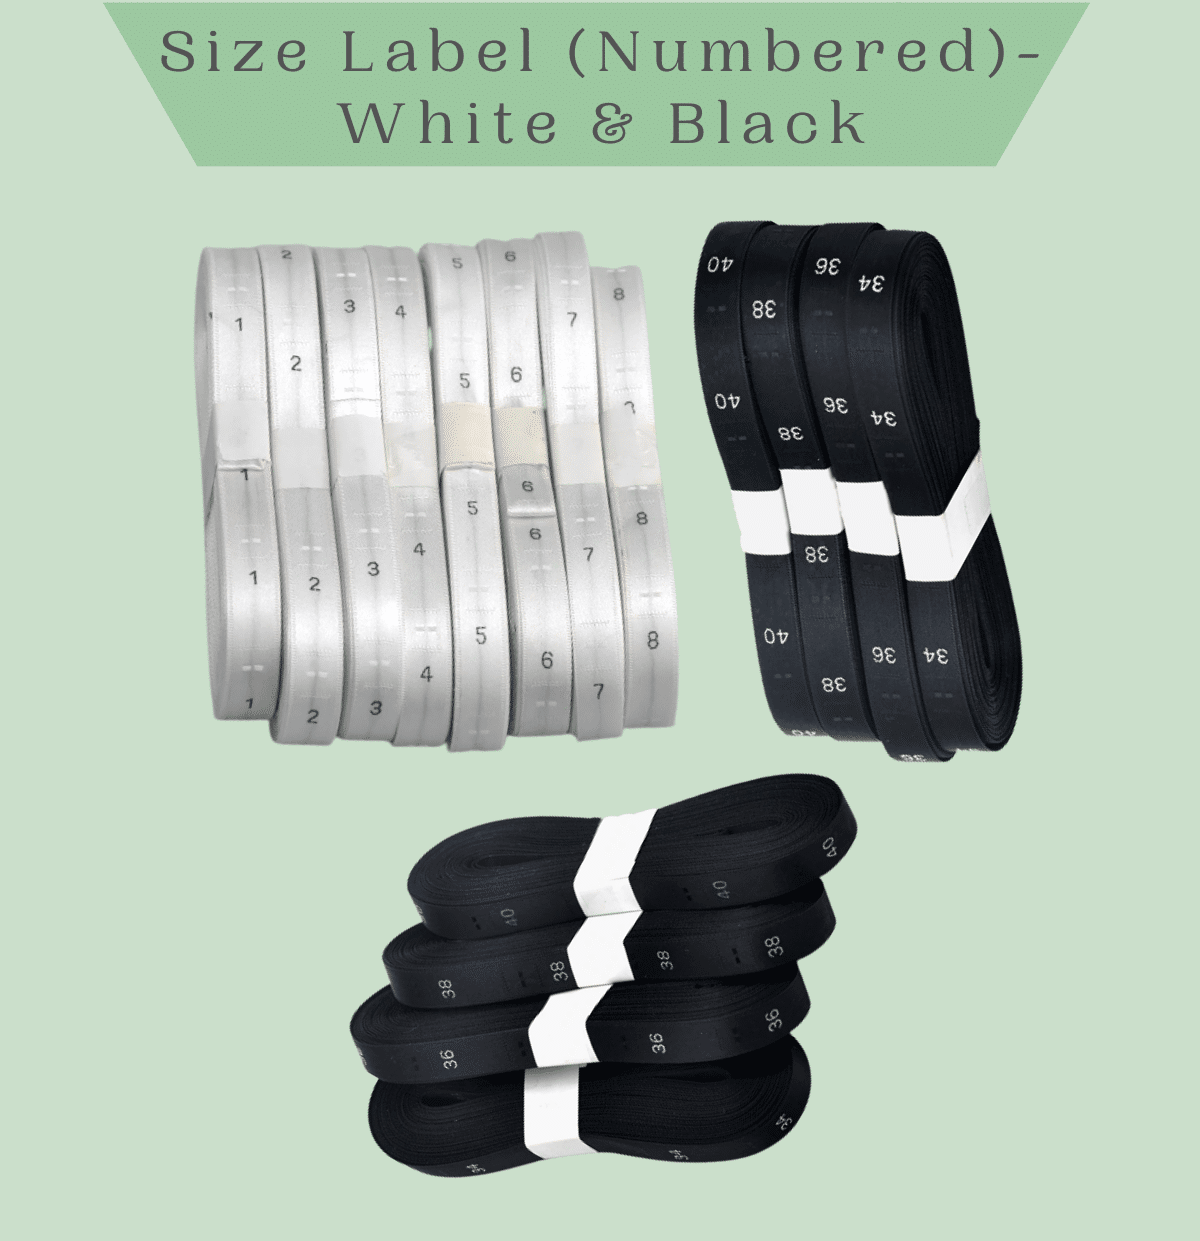 Size Labels Numbered - White & Black